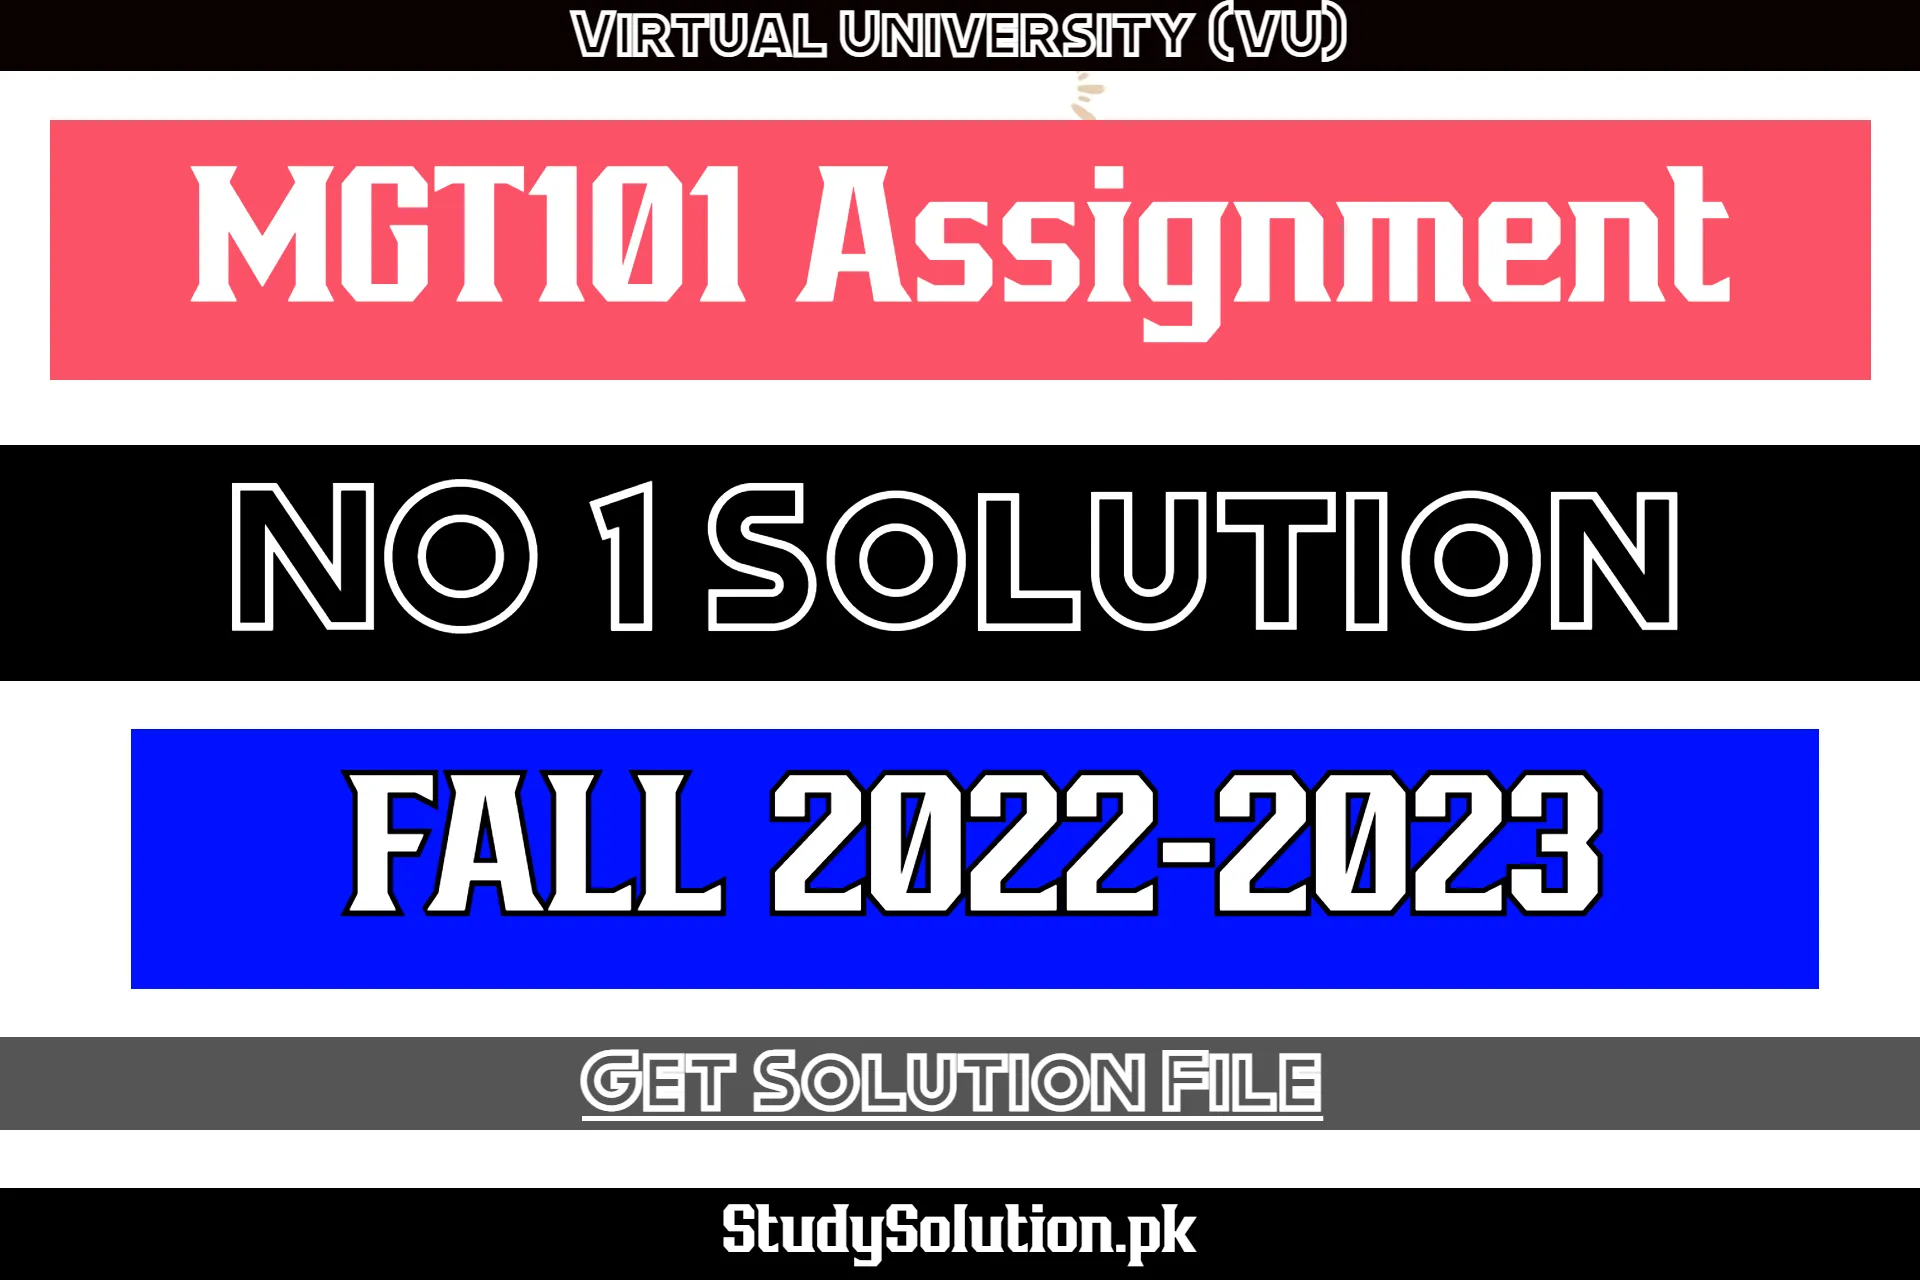 MGT101 Assignment No 1 Solution Fall 2022